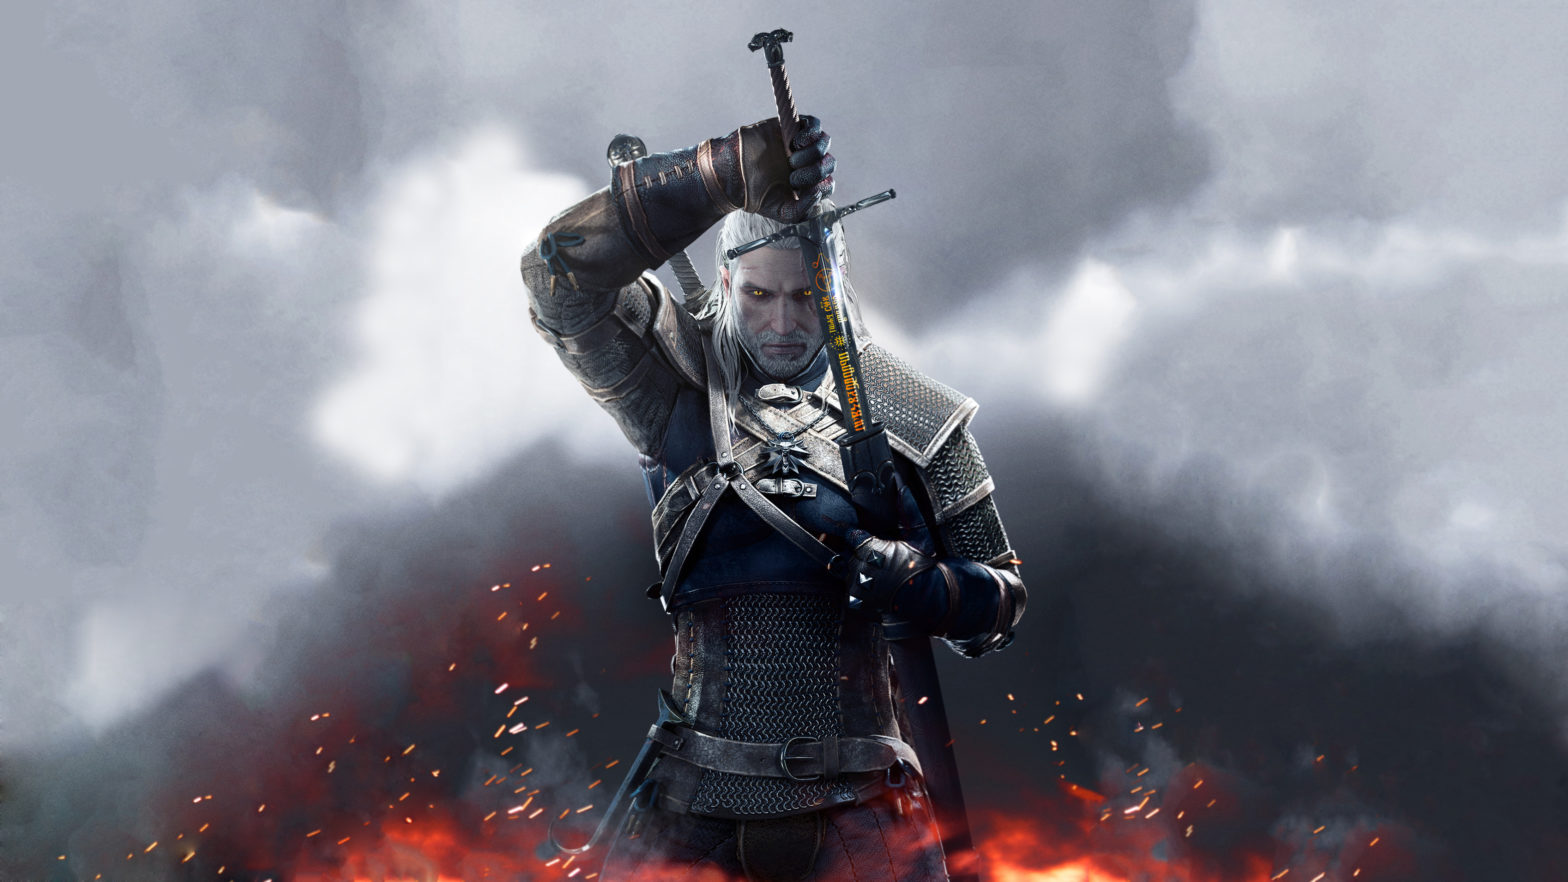 What “The Witcher” can teach us about information security